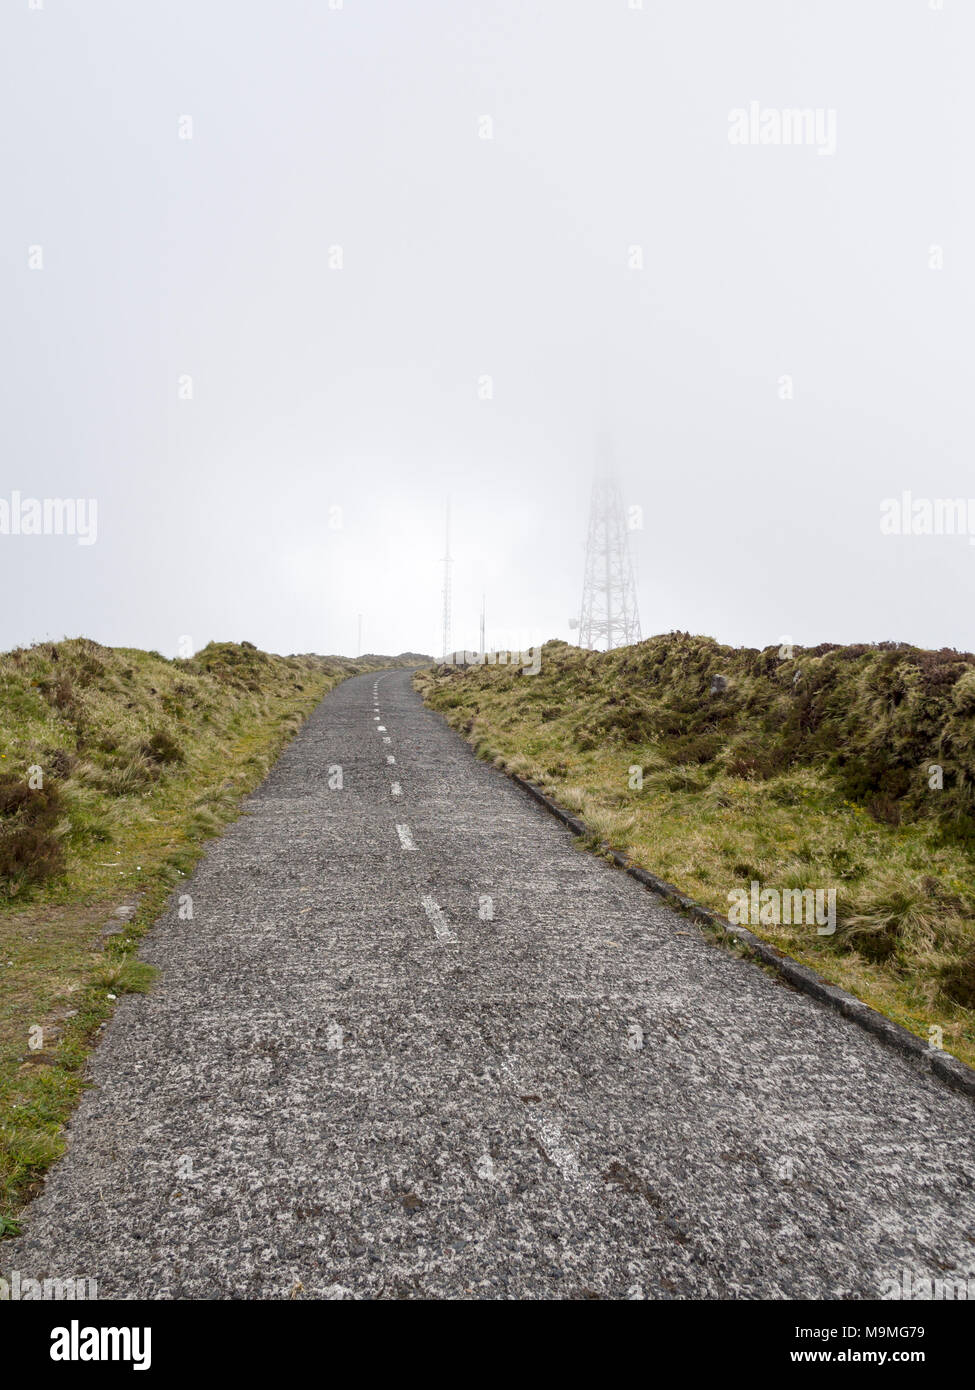 High Road to the Clouds: A small paved road curves toward some fog enshrouded communication towers high on the hills above Lagoa do Fogo. Stock Photo